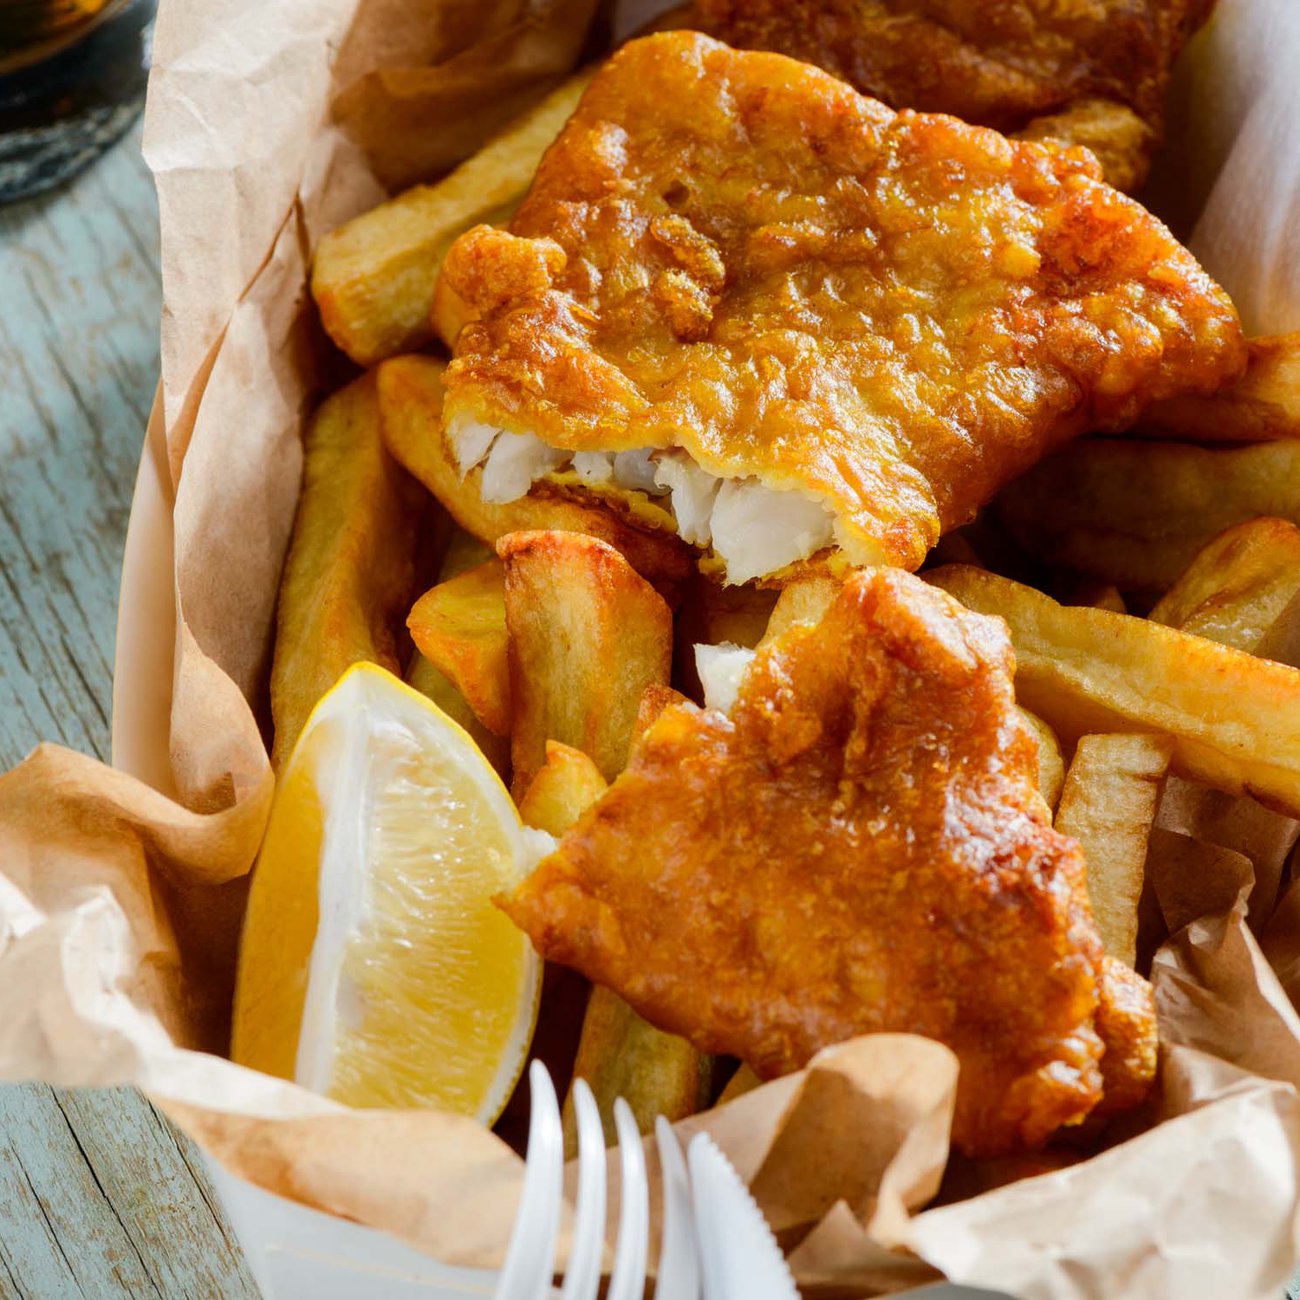 End the day with fish and chips